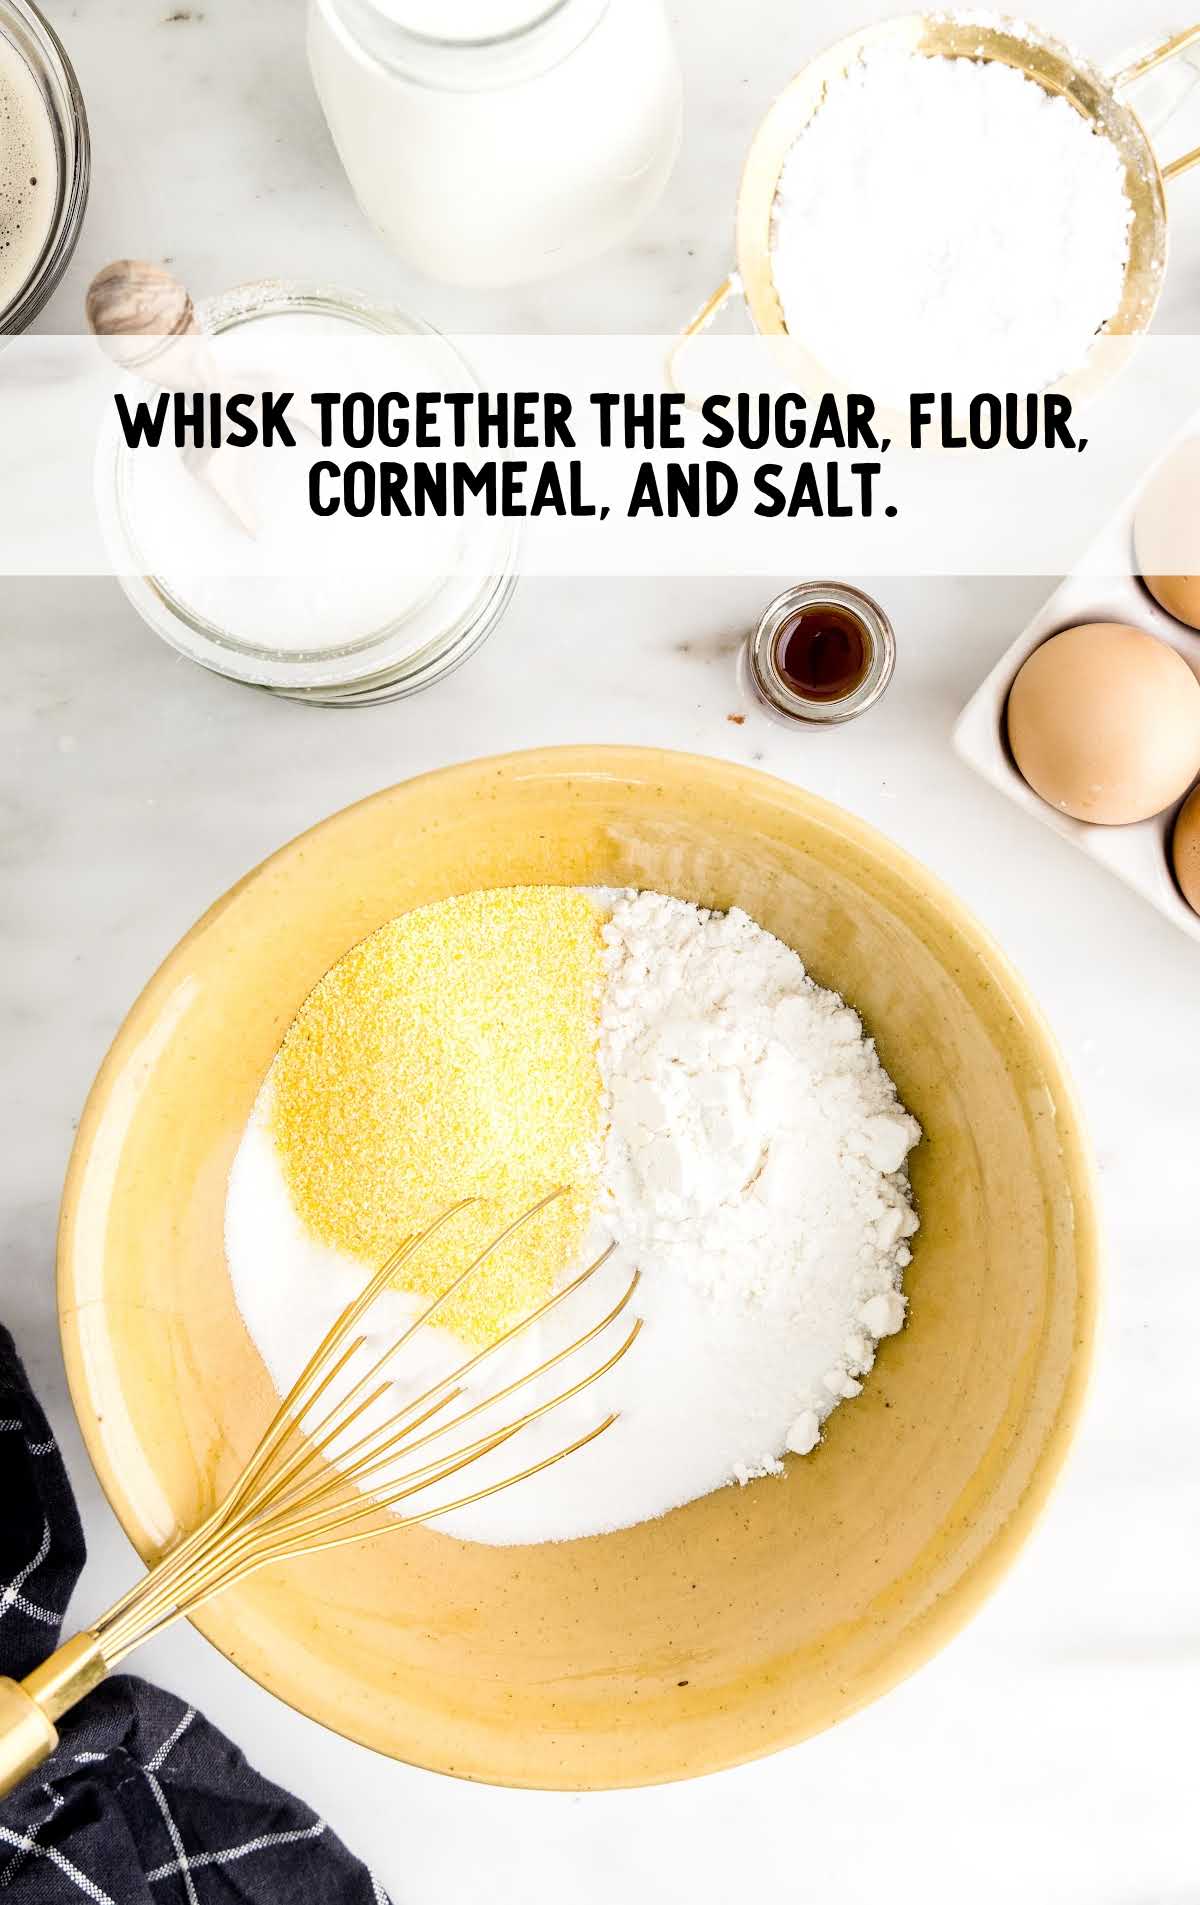 sugar, flour, cornmeal, and salt whisked in a bowl